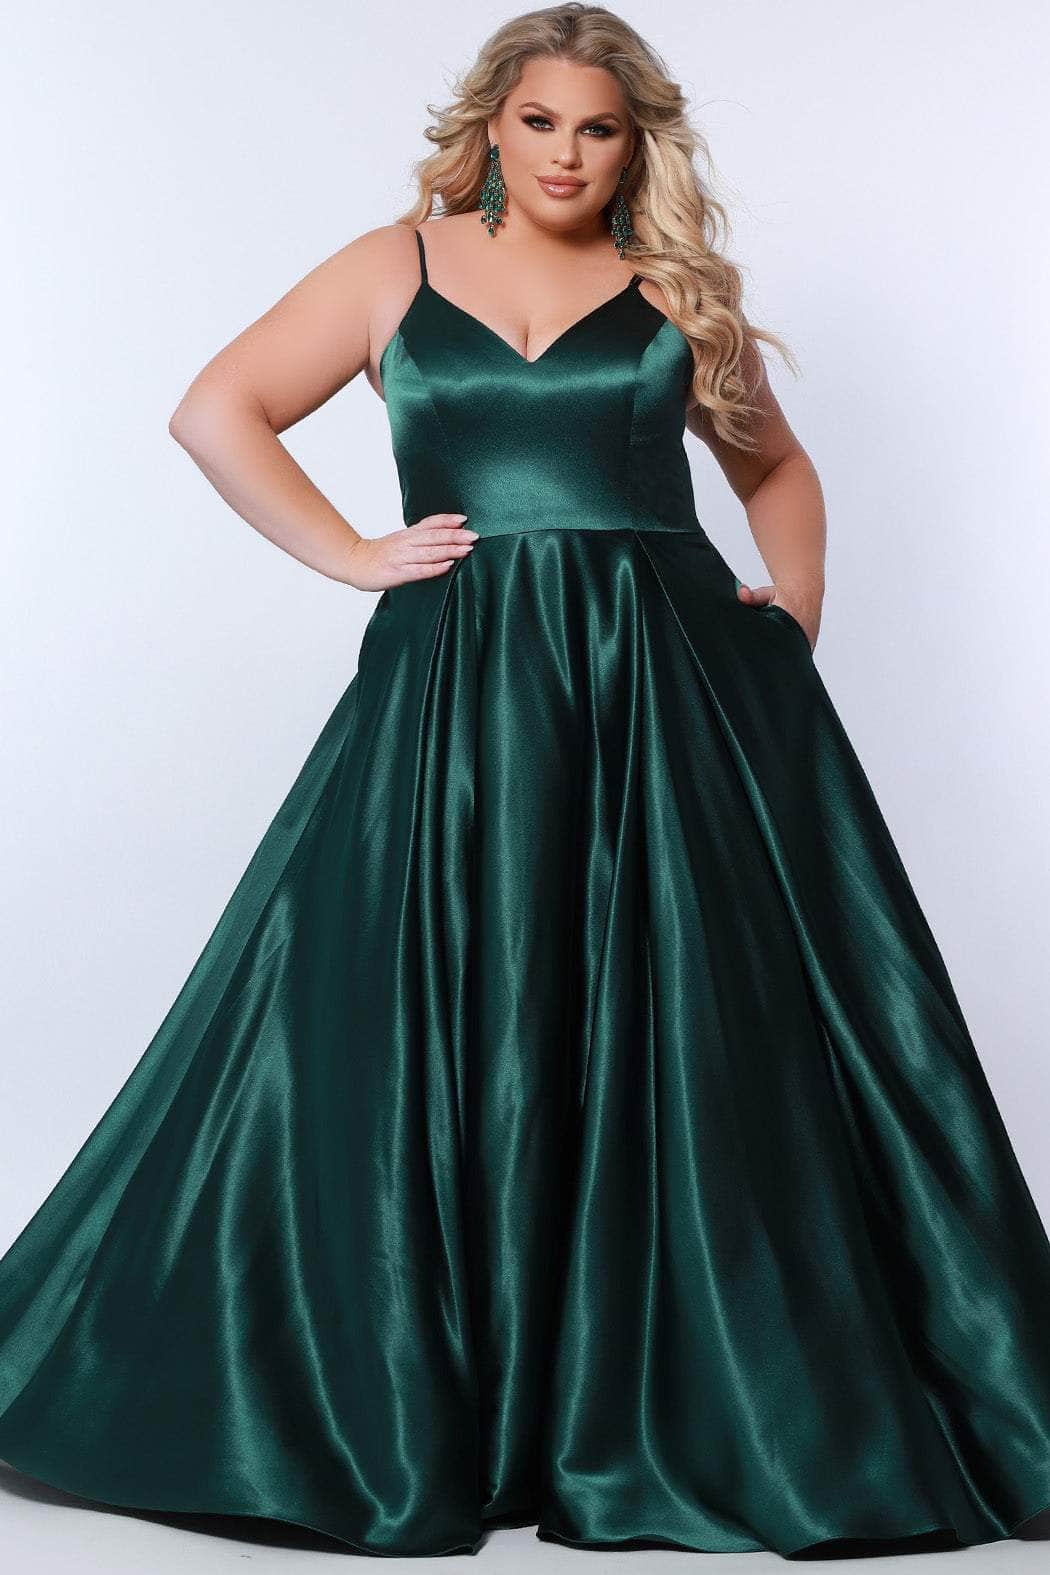 Sydney's Closet SC7363 - V-Neck Pleated A-Line Evening Gown Special Occasion Dress